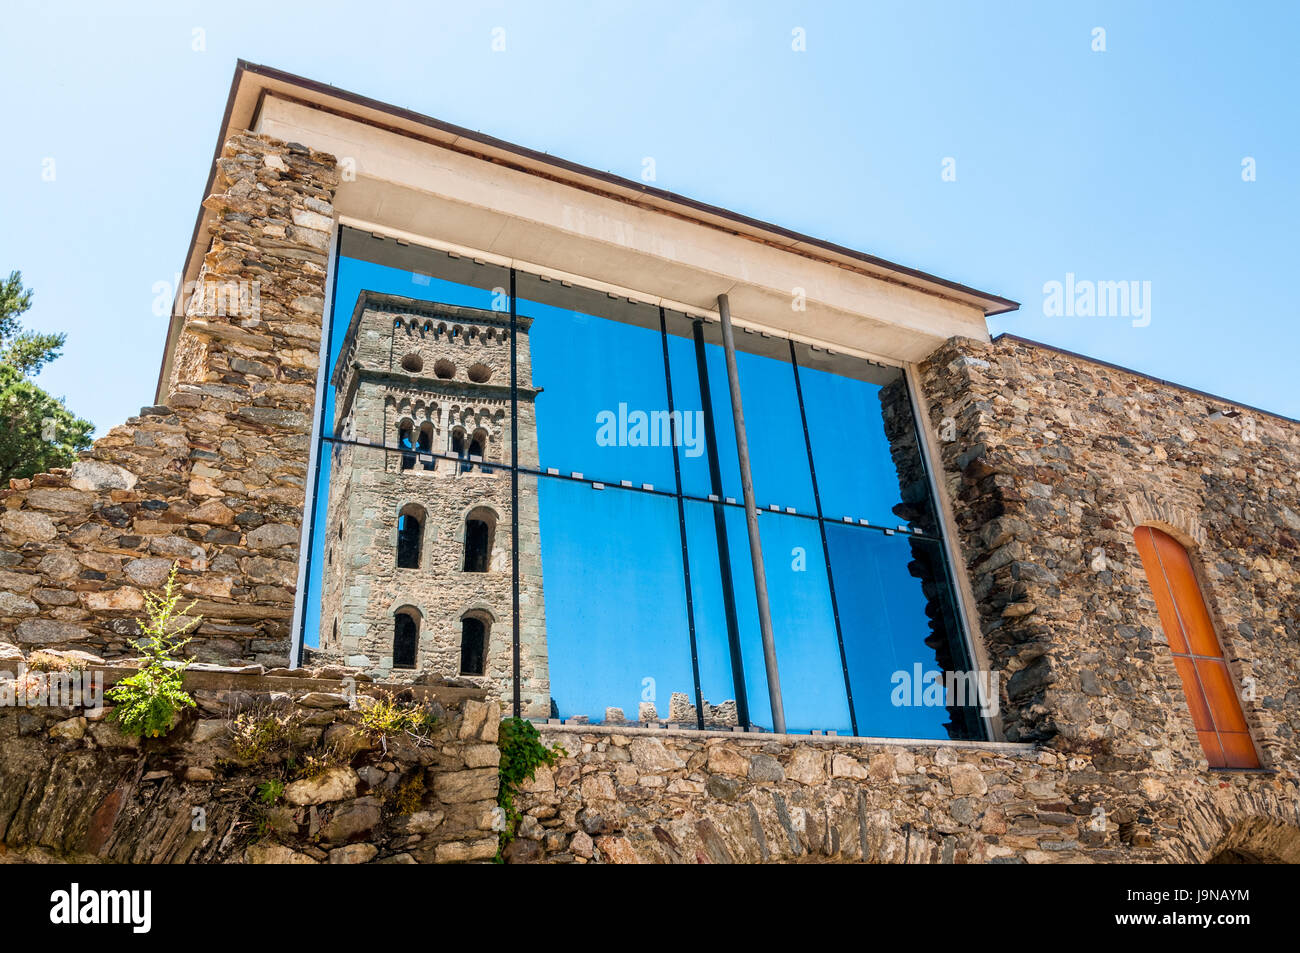 Belfry reflected in the glass of the entrance building, Sant Pere de Rodes, Girona, Catalonia Stock Photo